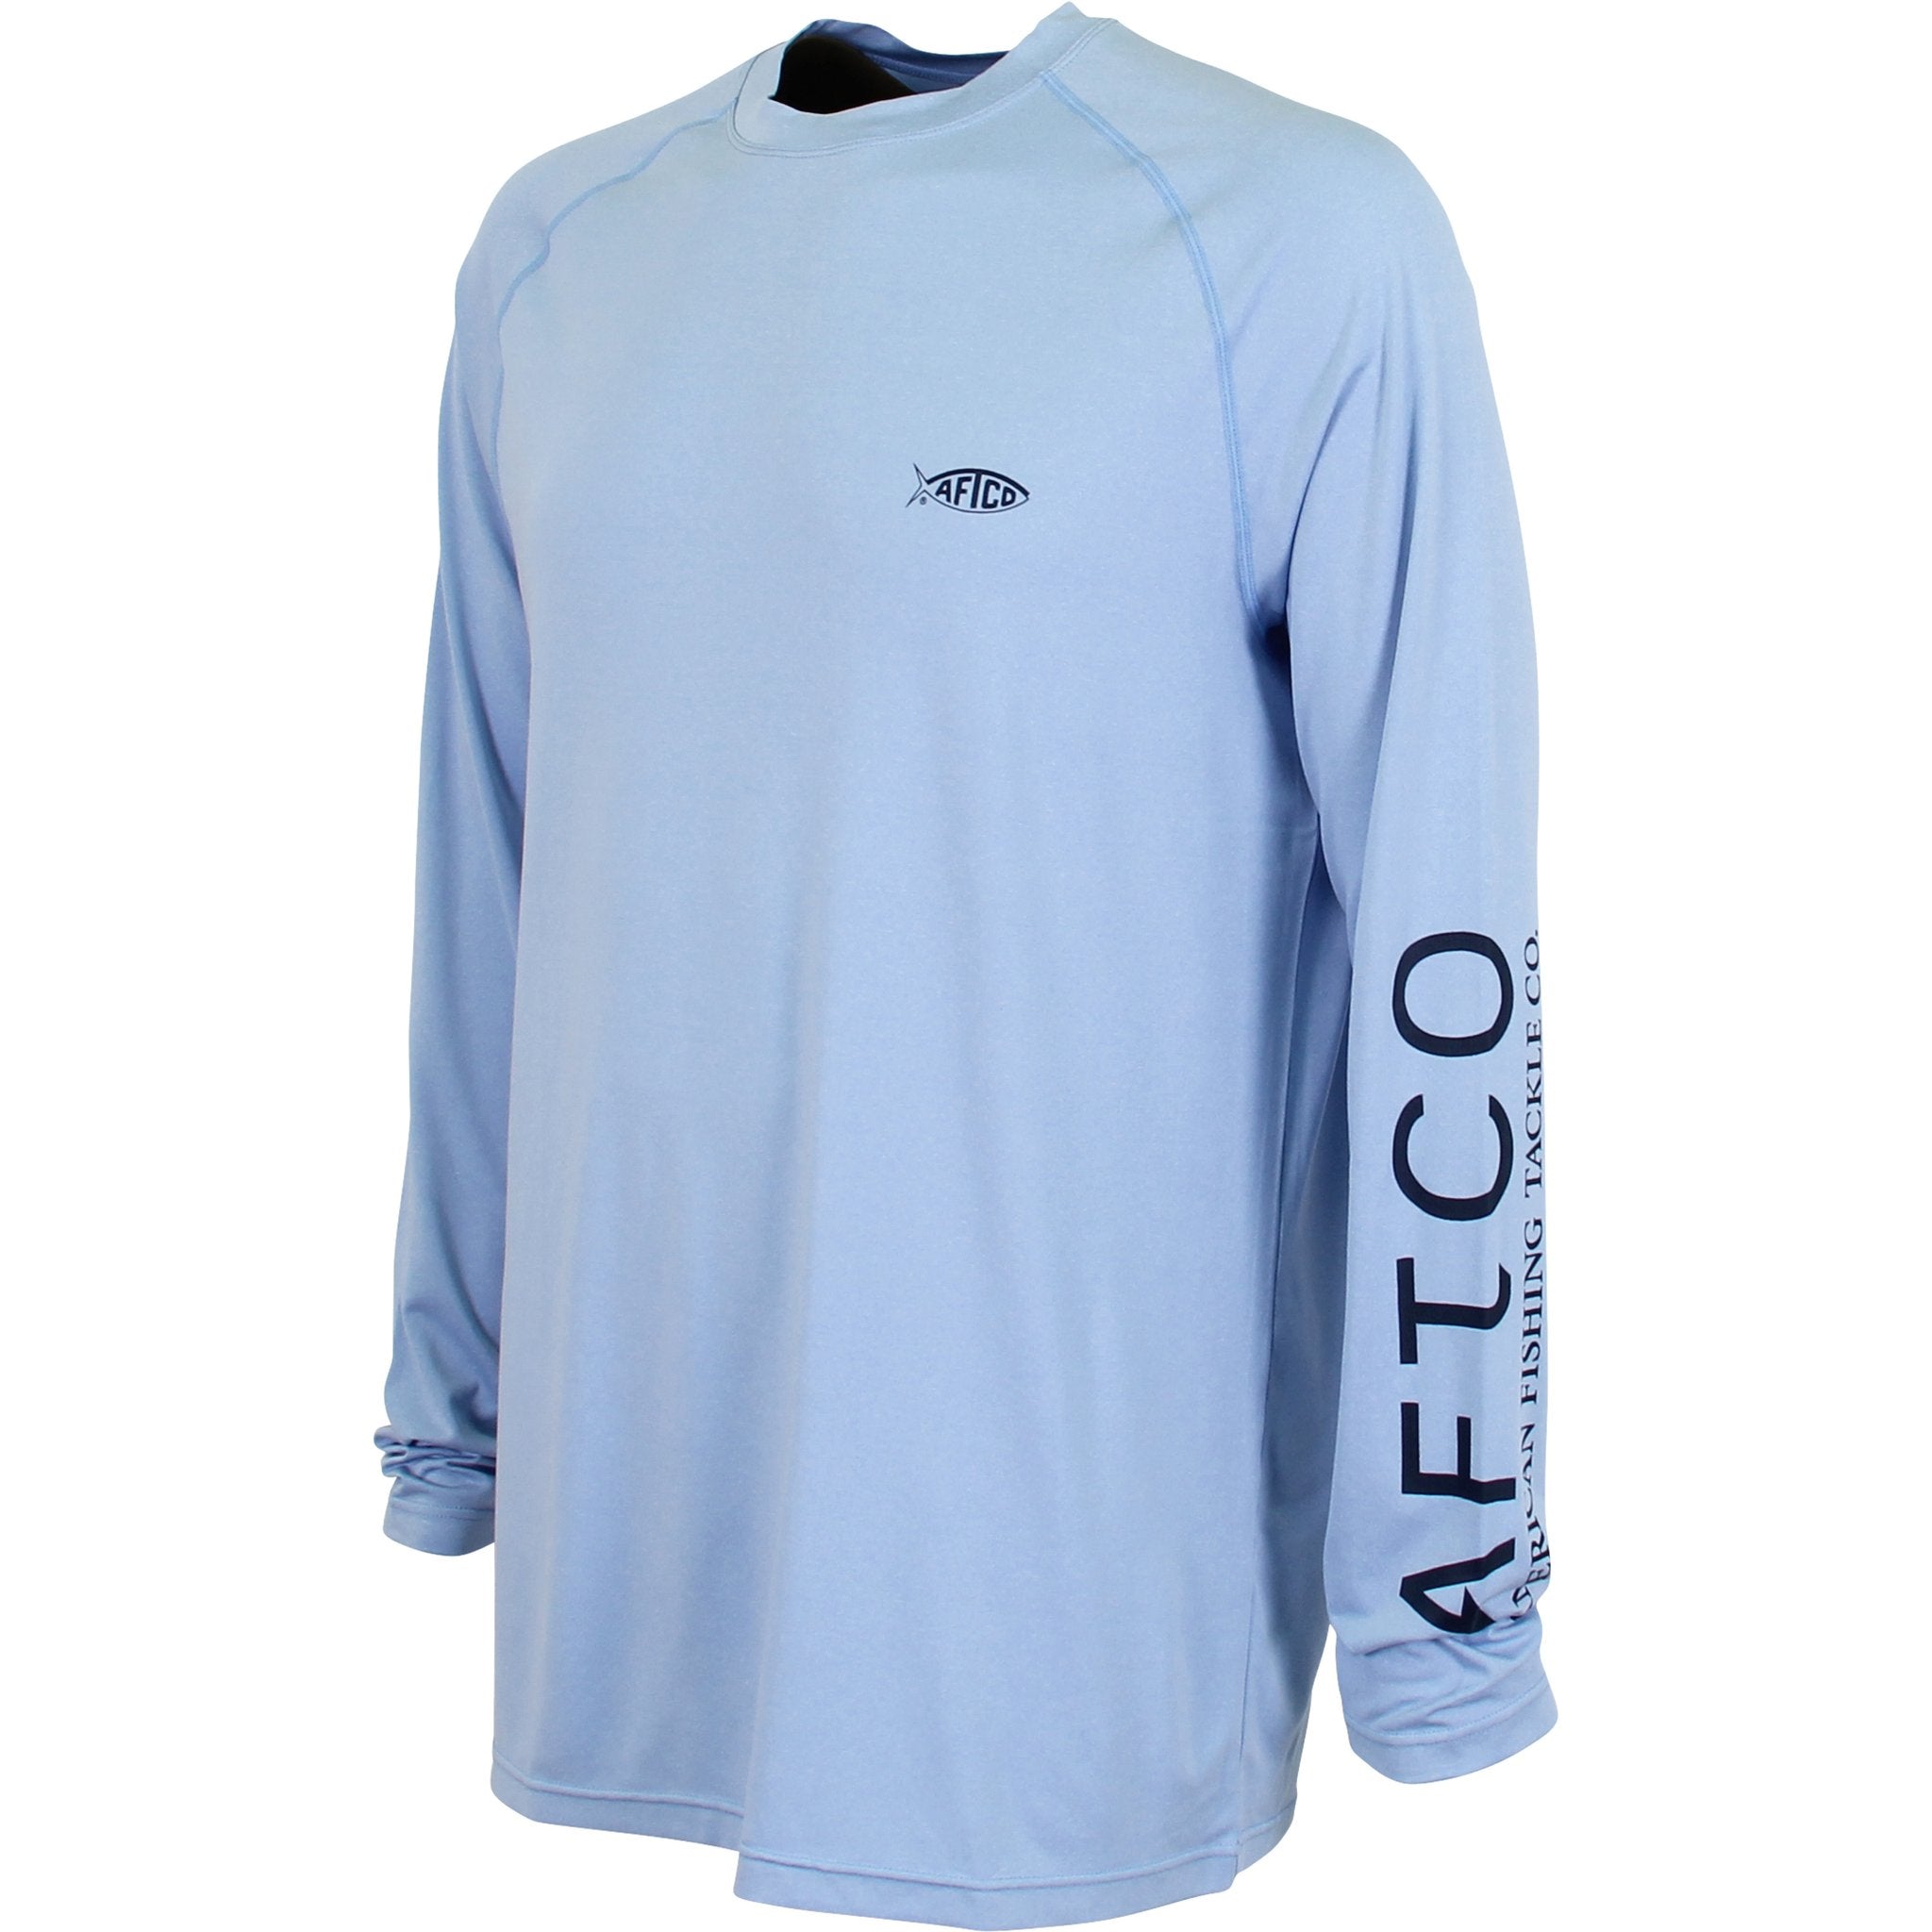 Samurai 2 Heathered Performance Fishing Shirt from AFTCO – Fishing Complete  Inc